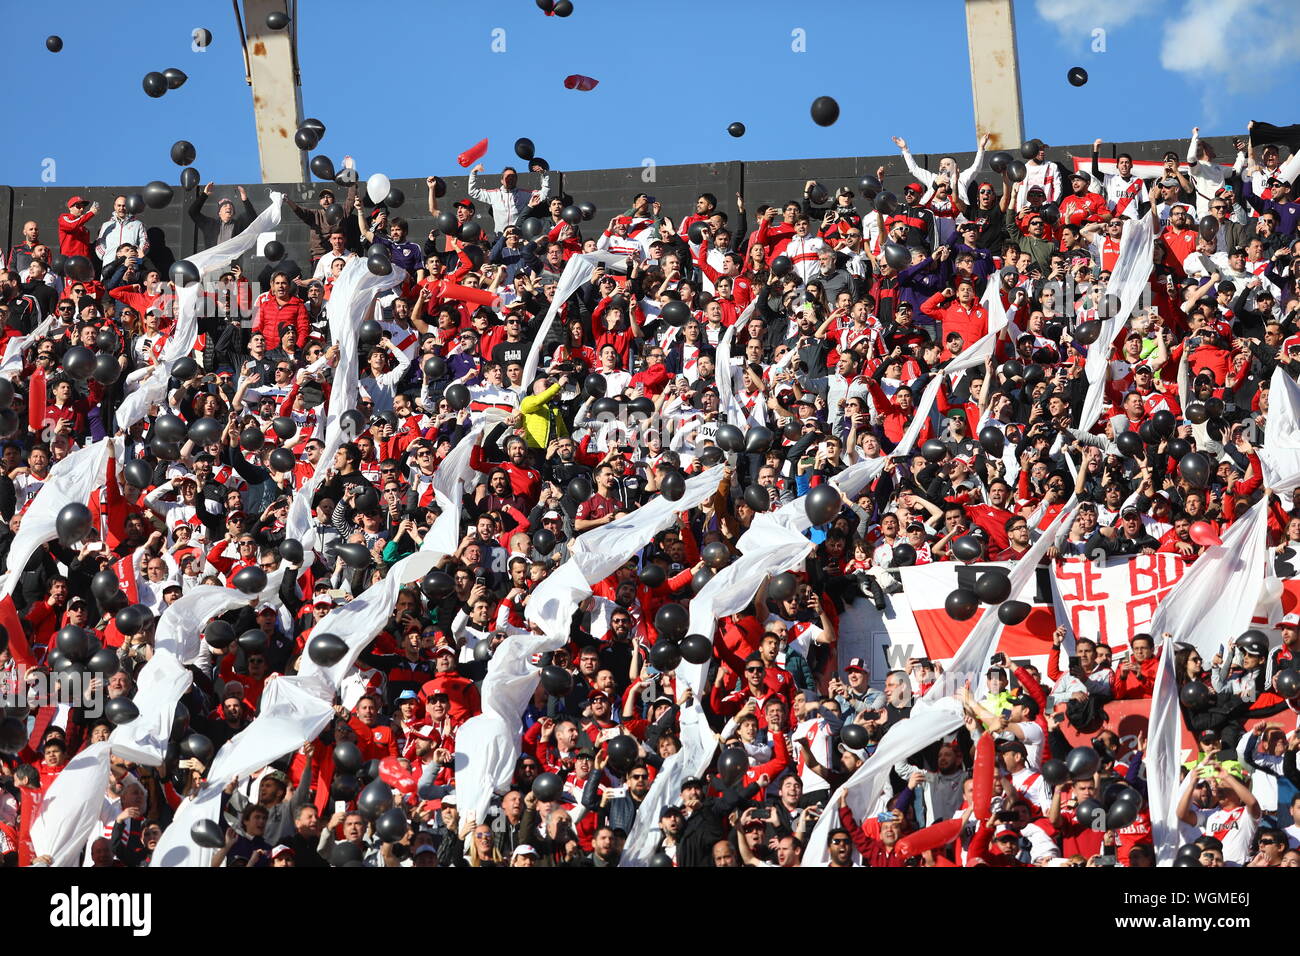 Buenos Aires, Argentina - September 01, 2019: River Plate fans in the beginning of the match in the Monumental Stadium in Buenos Aires, Argentina Stock Photo